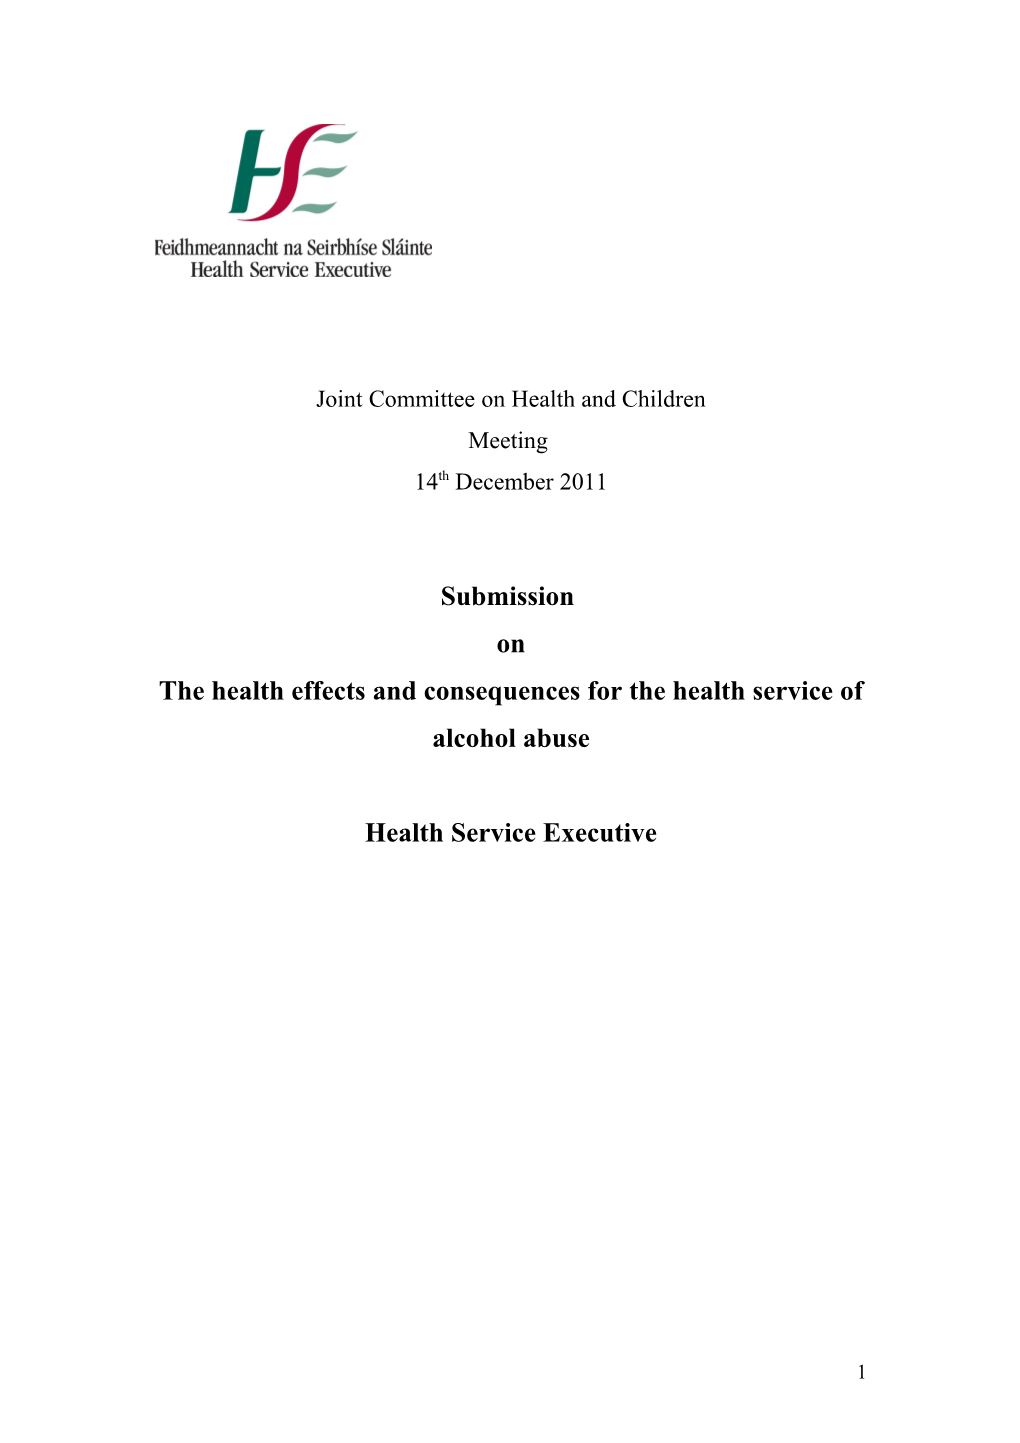 Submission to Joint Committee on Health and Children